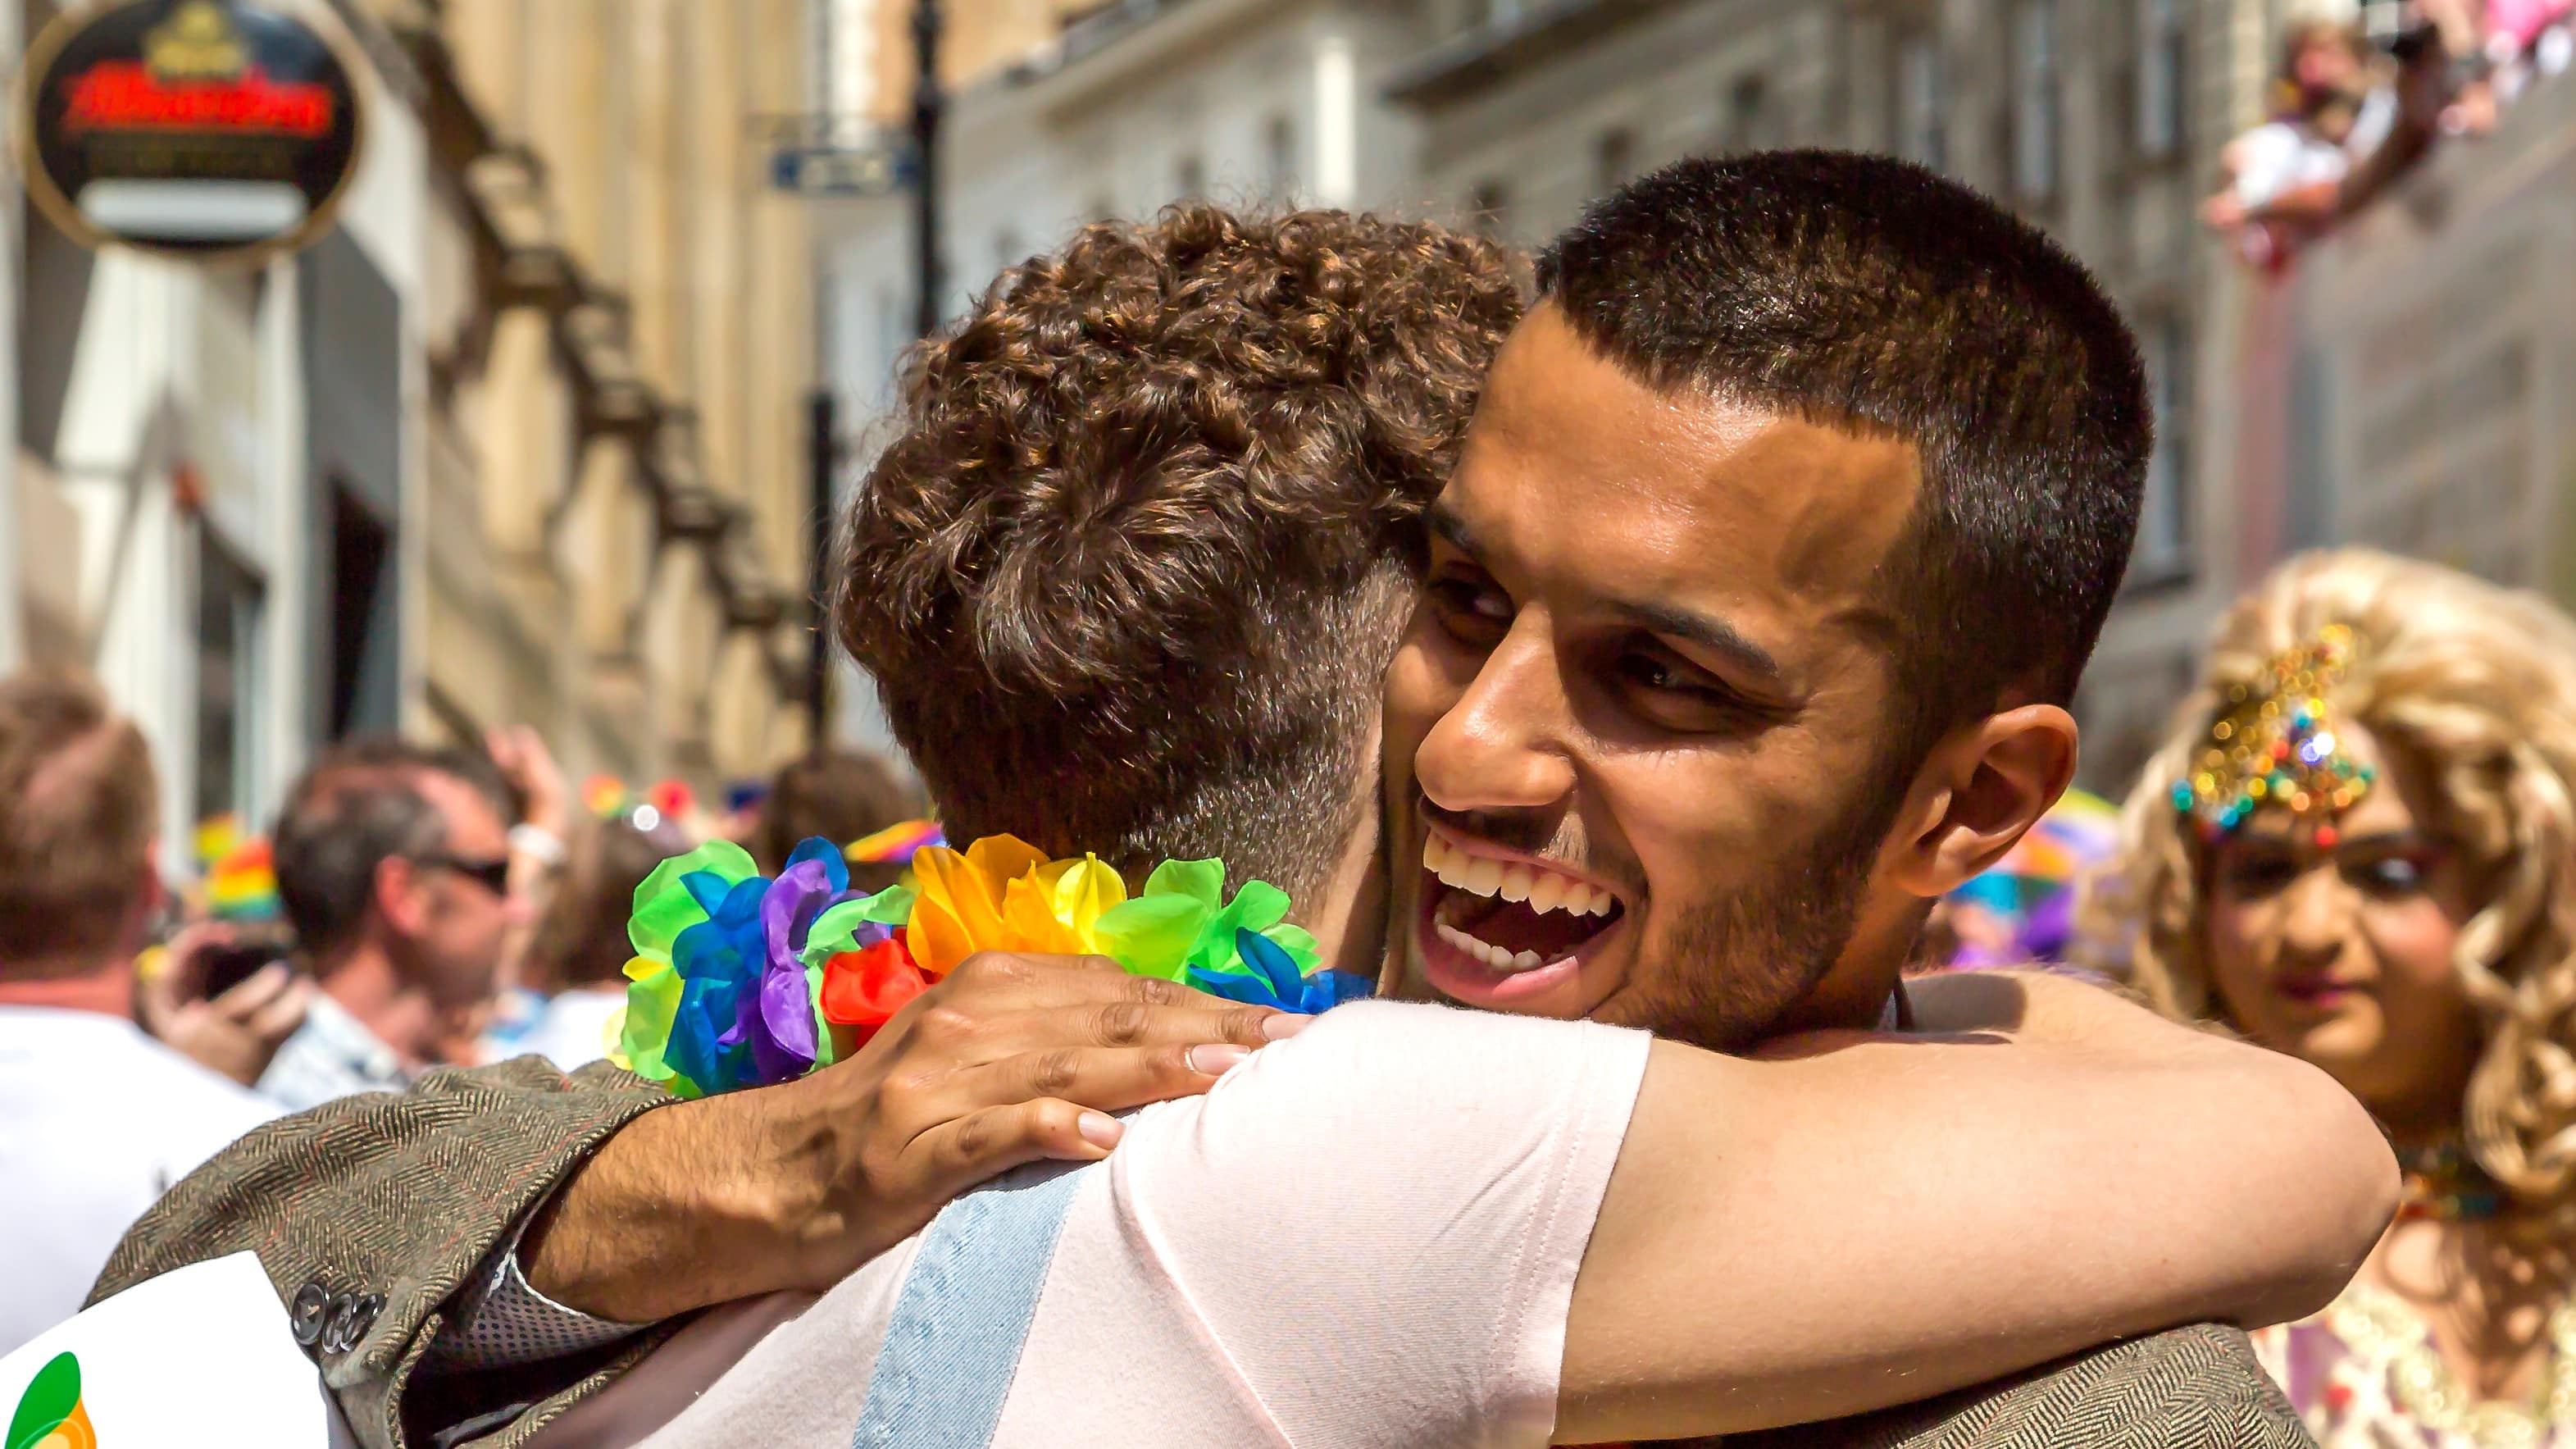 Two men show delight as they hug each other during the Birmingham Pride celebrations in Birmingham City centre.